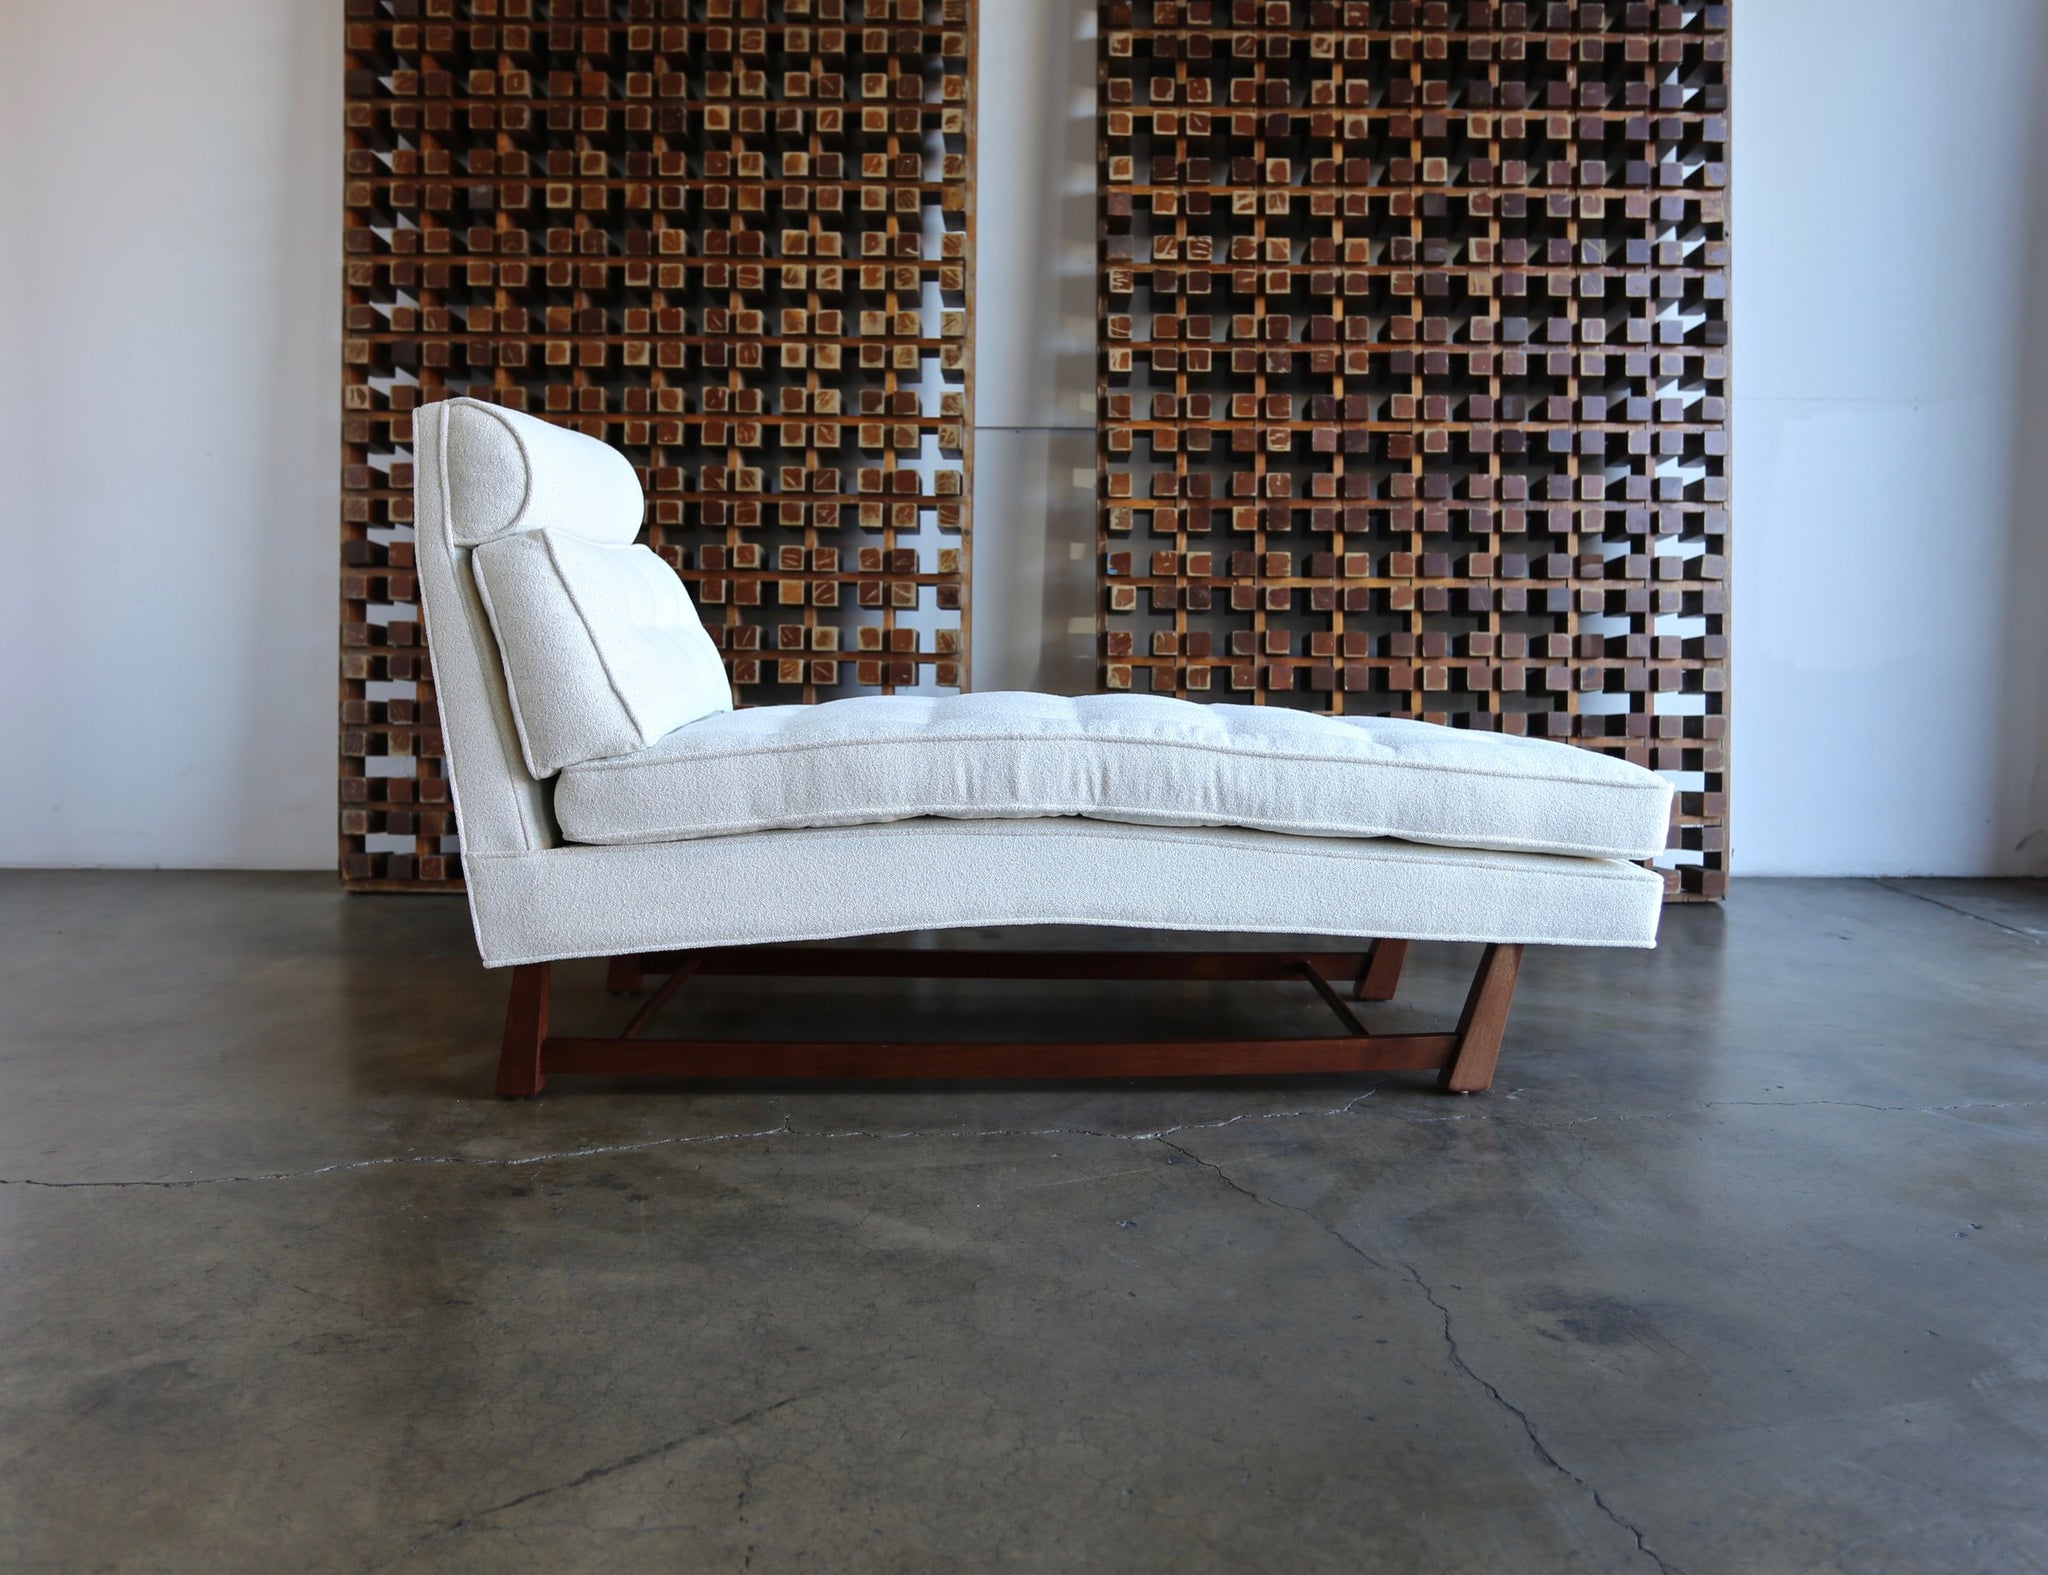 = SOLD = Rare Chaise Longue by Edward Wormley for Dunbar